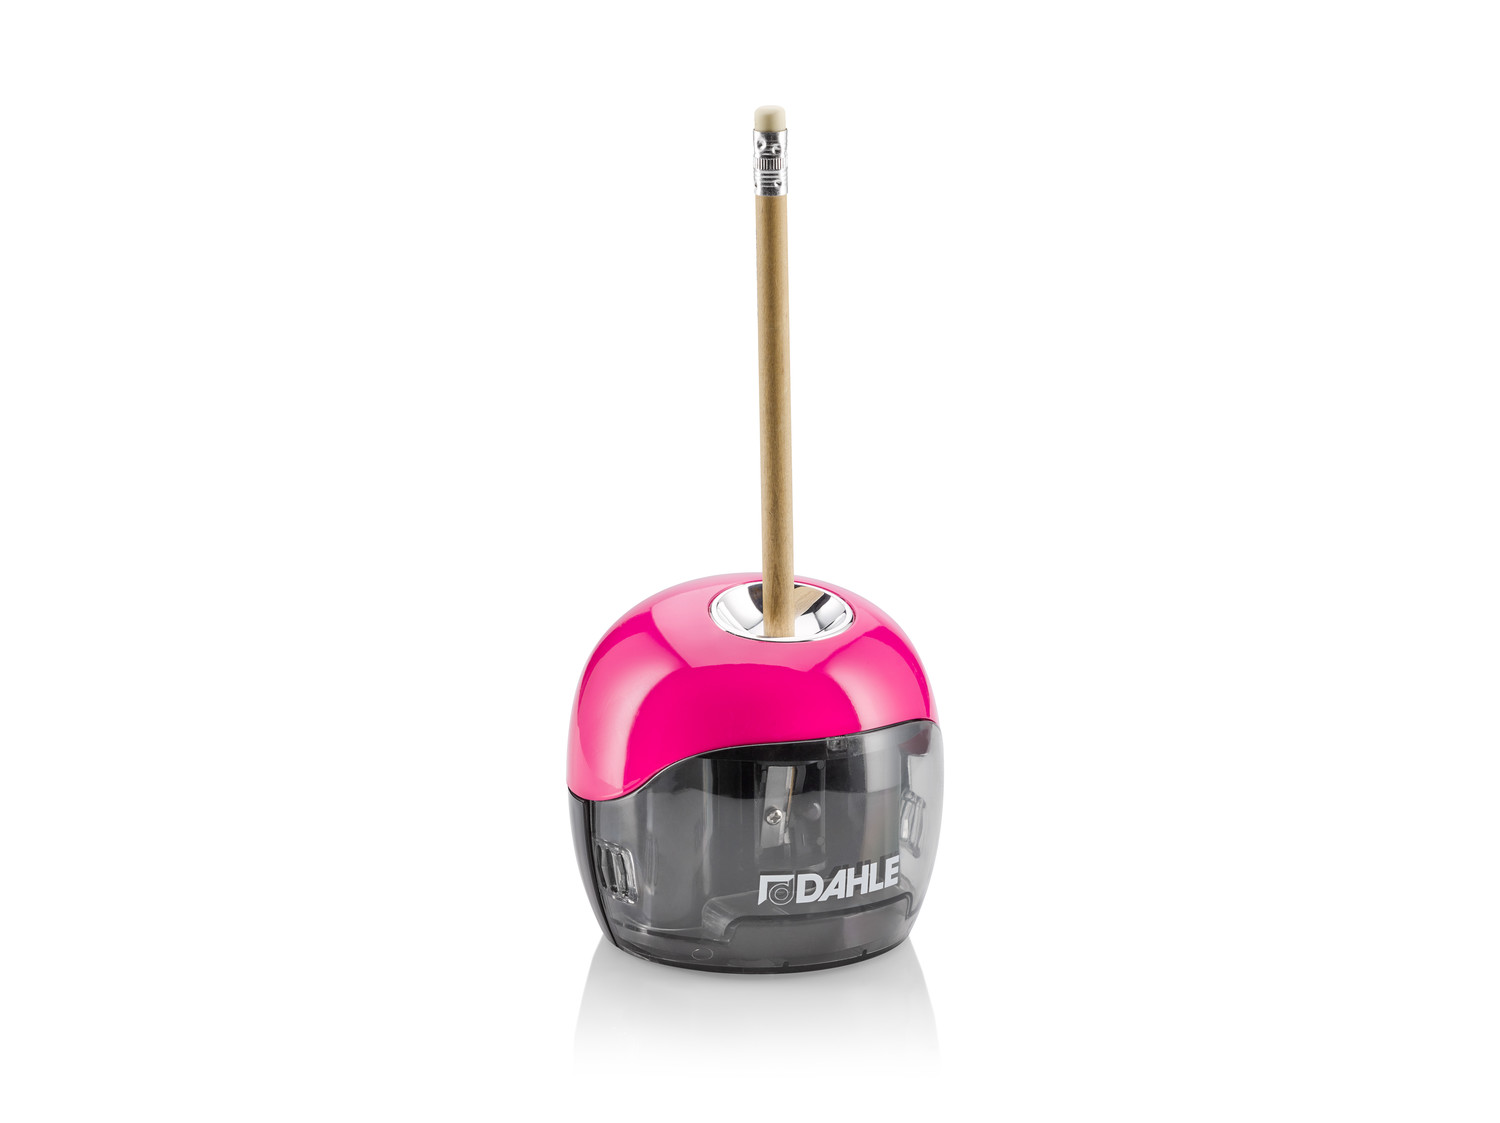 Easy to use: simply insert the pencil vertically into the opening from above and the sharpener will take care of the rest.